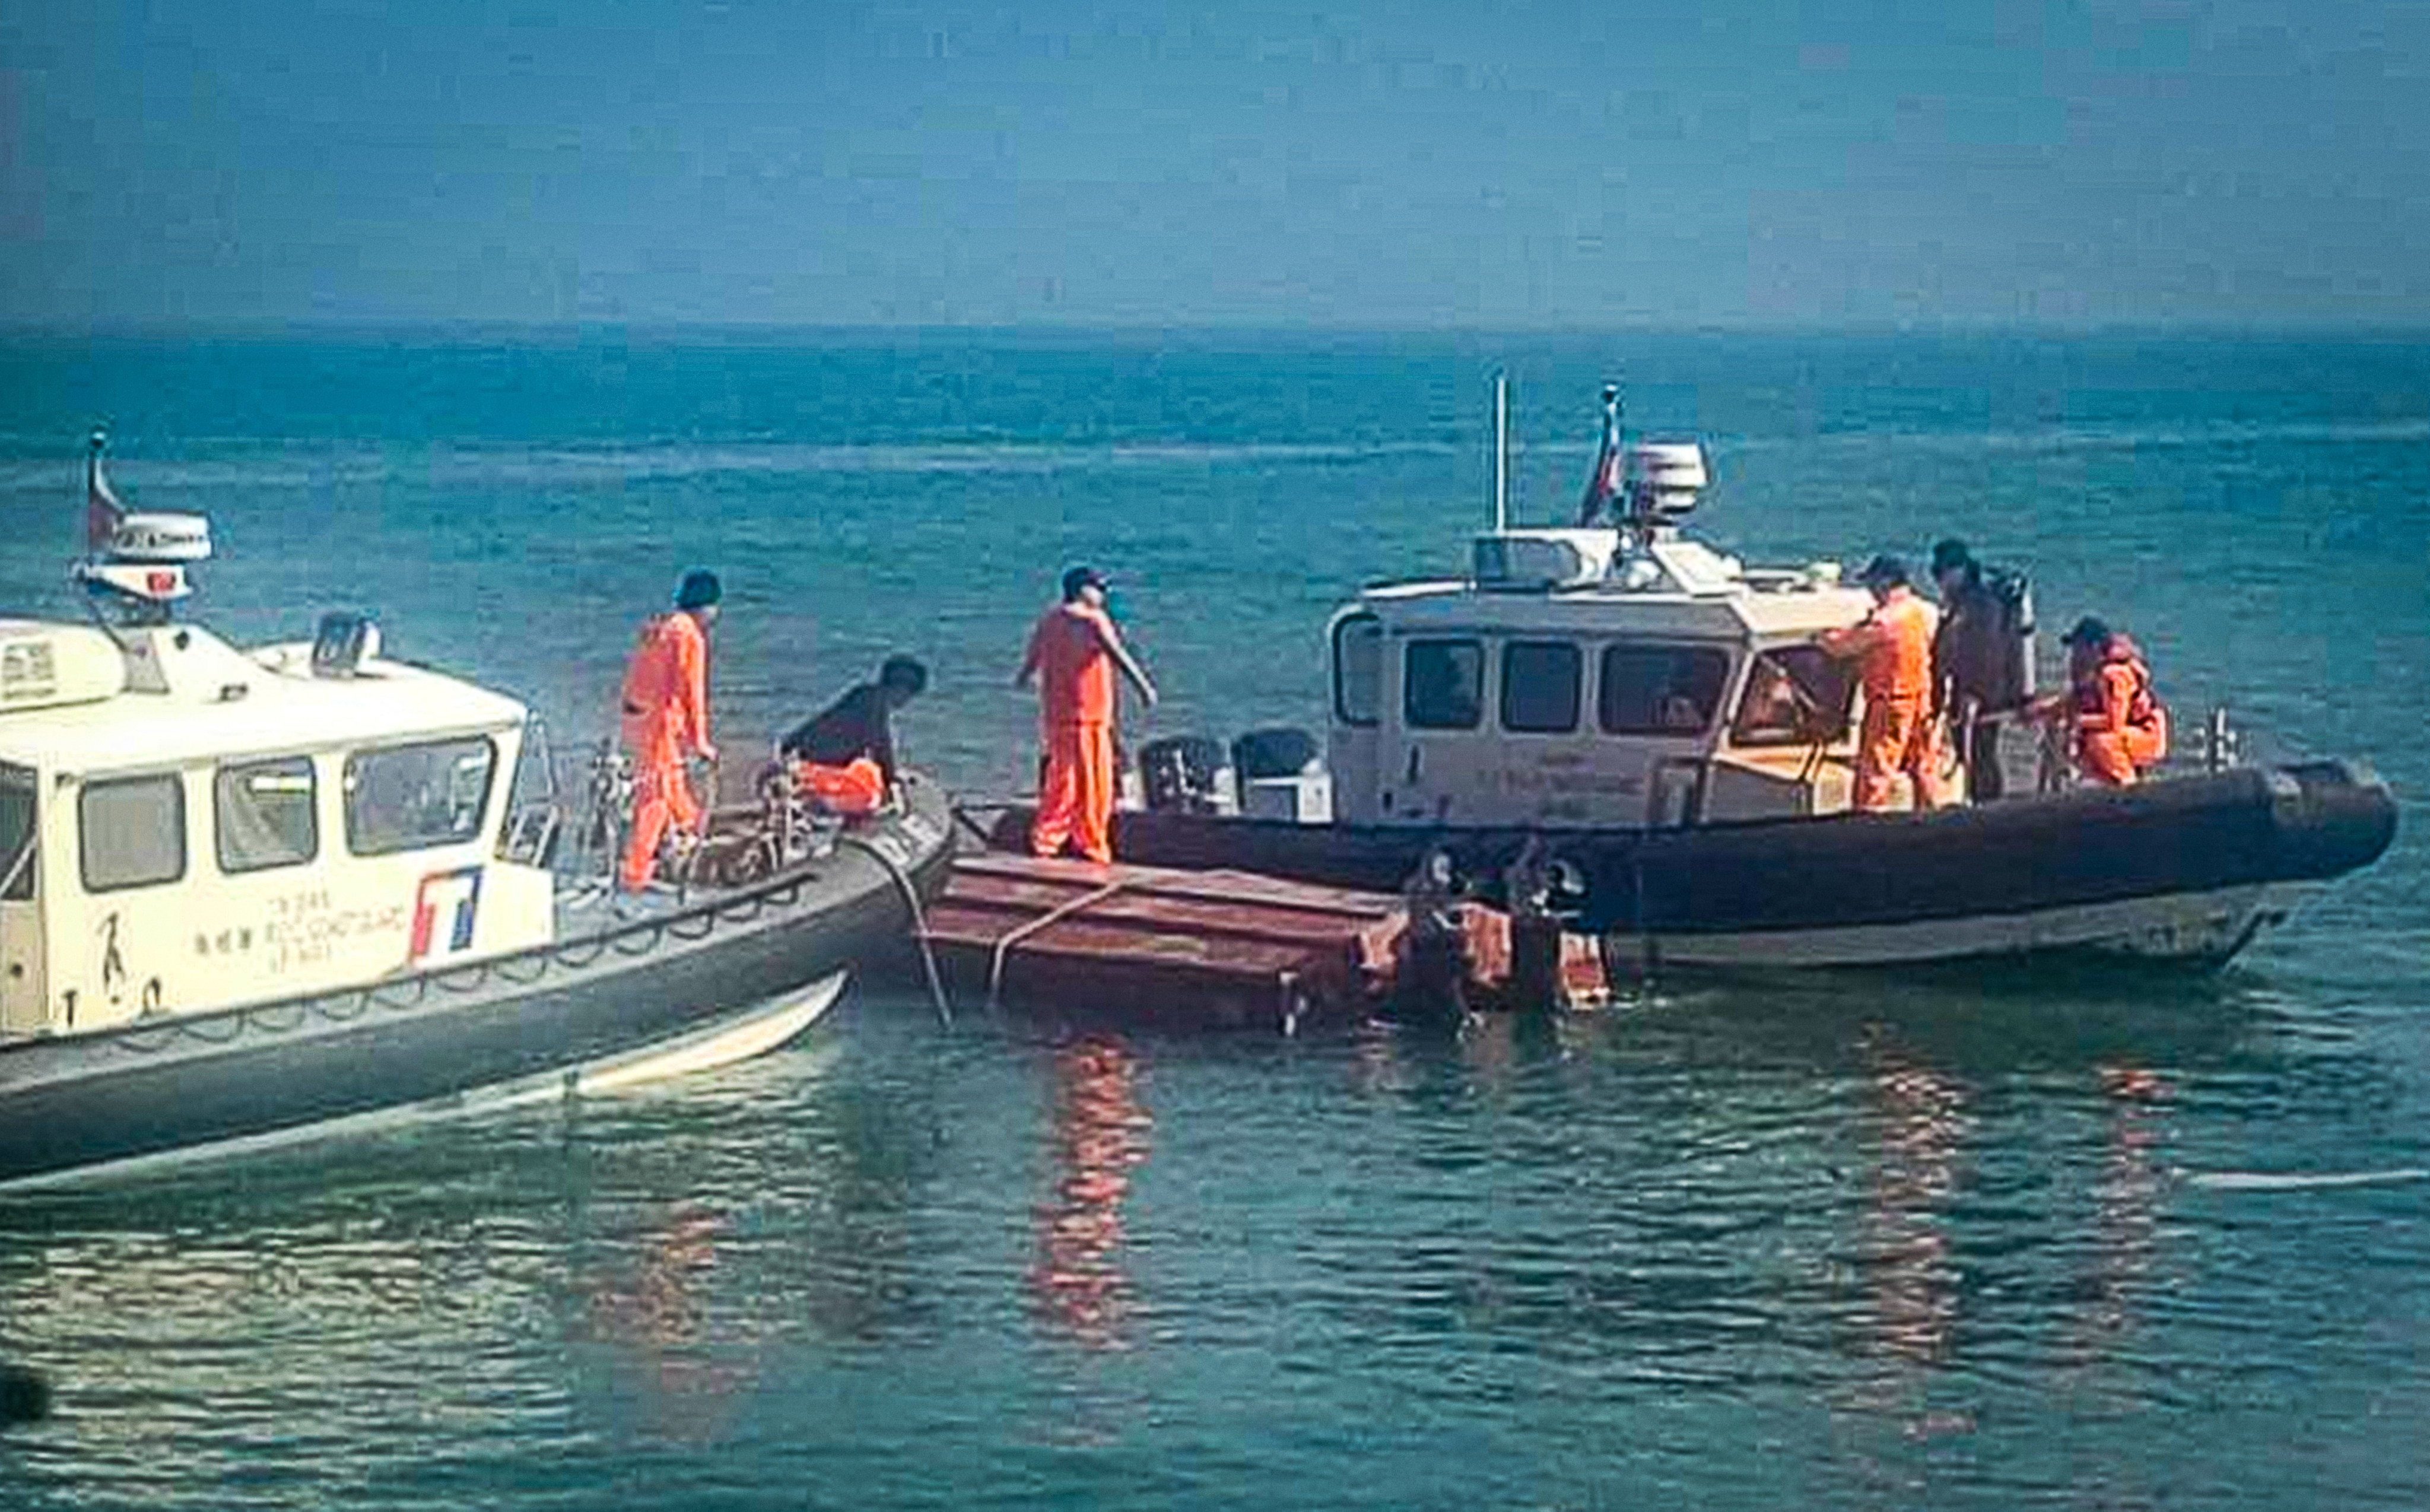 A speedboat carrying fishermen from mainland China capsizes after being chased by the Taiwanese coastguard near Quemoy on February 14, leaving two dead. Photo: Taiwan’s Coast Guard Administration